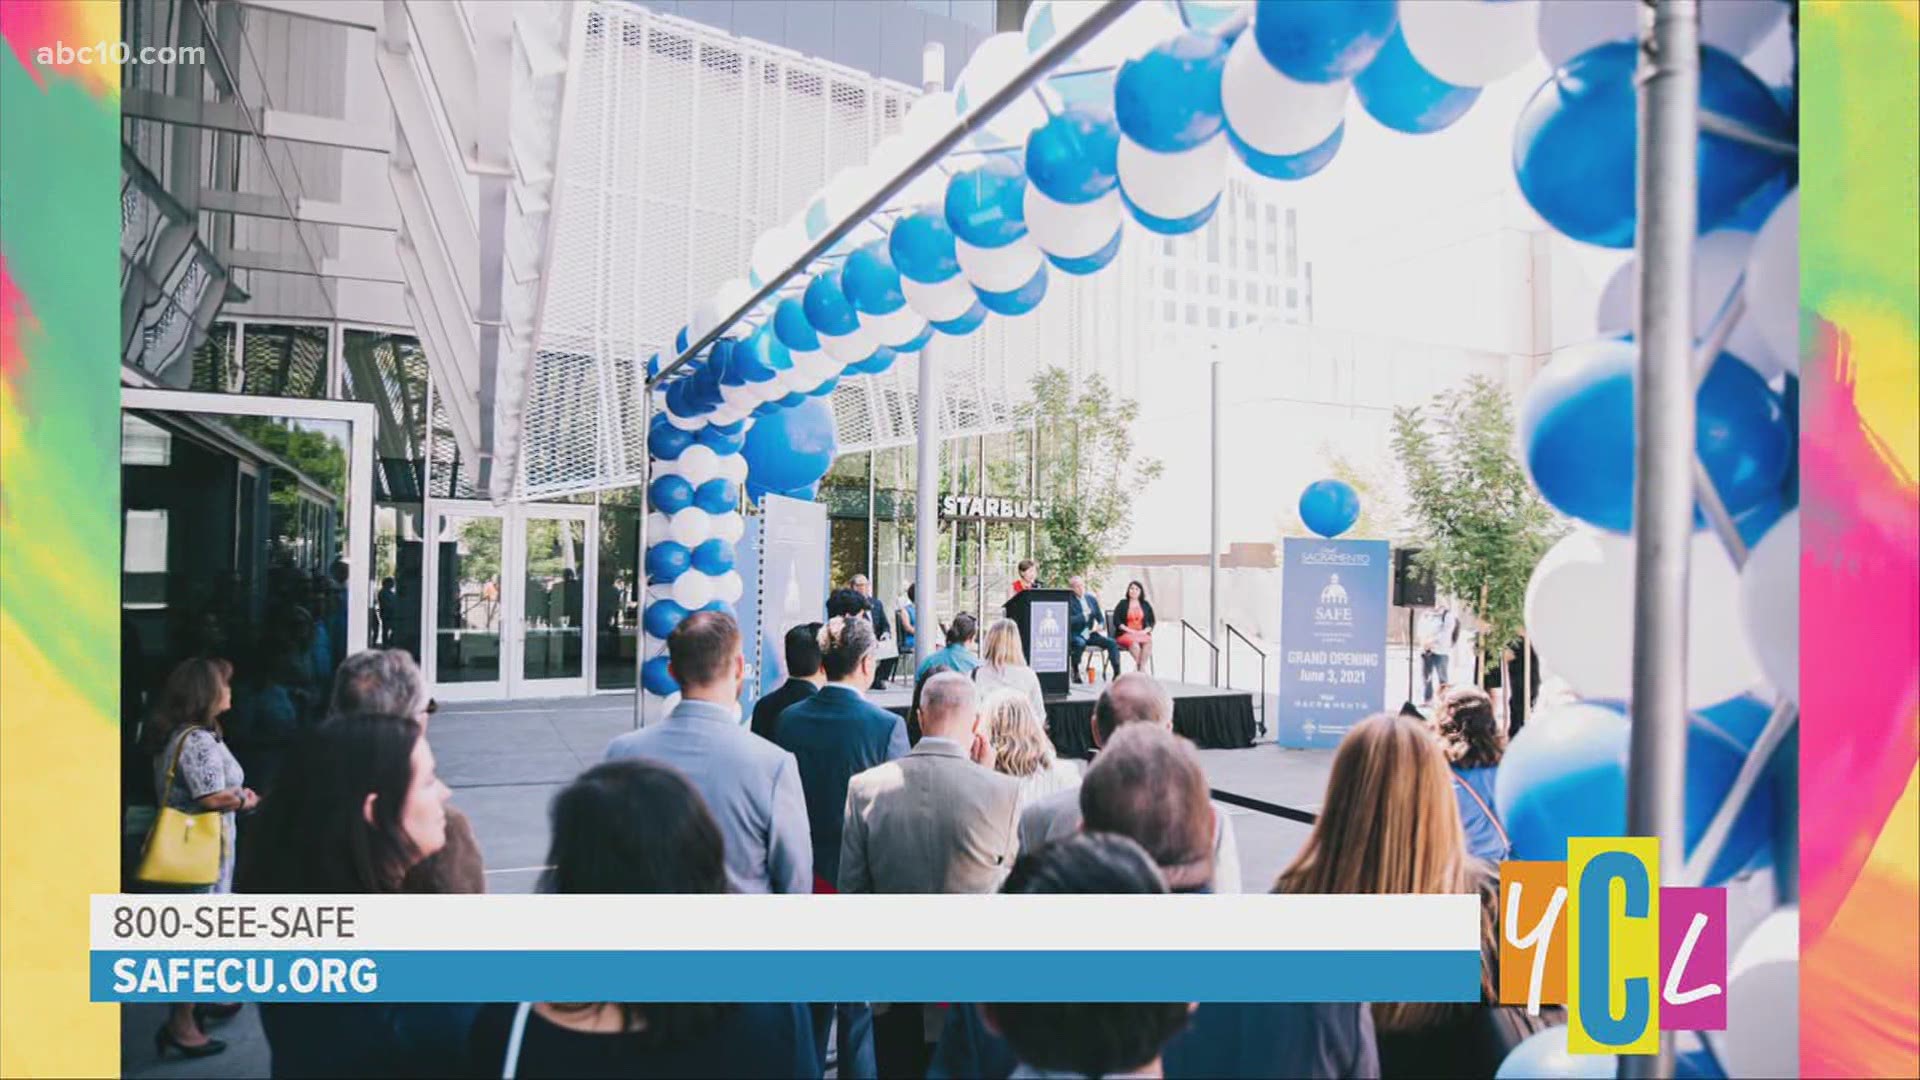 SAFE Credit Union has partnered with the city of Sacramento for downtown's all-new SAFE Credit Union Convention Center. This segment paid for by SAFE Credit Union.